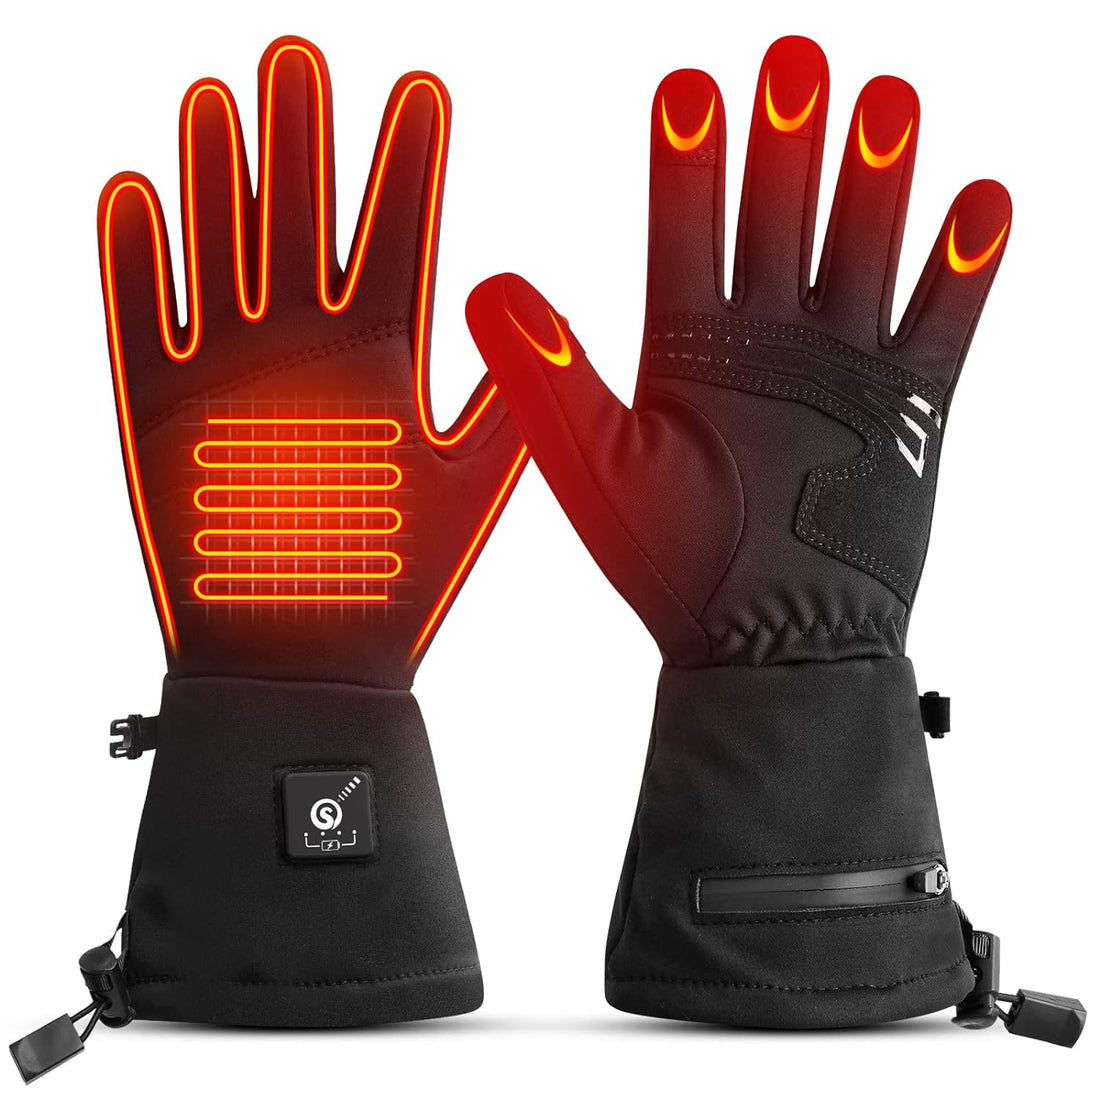 Heated Glove Liners, Upgraded Winter Gloves for Men Women Rechargeable Battery Electric Thermal Thin Gloves Windproof for Skiing Snowboarding Hiking Cycling Hunting